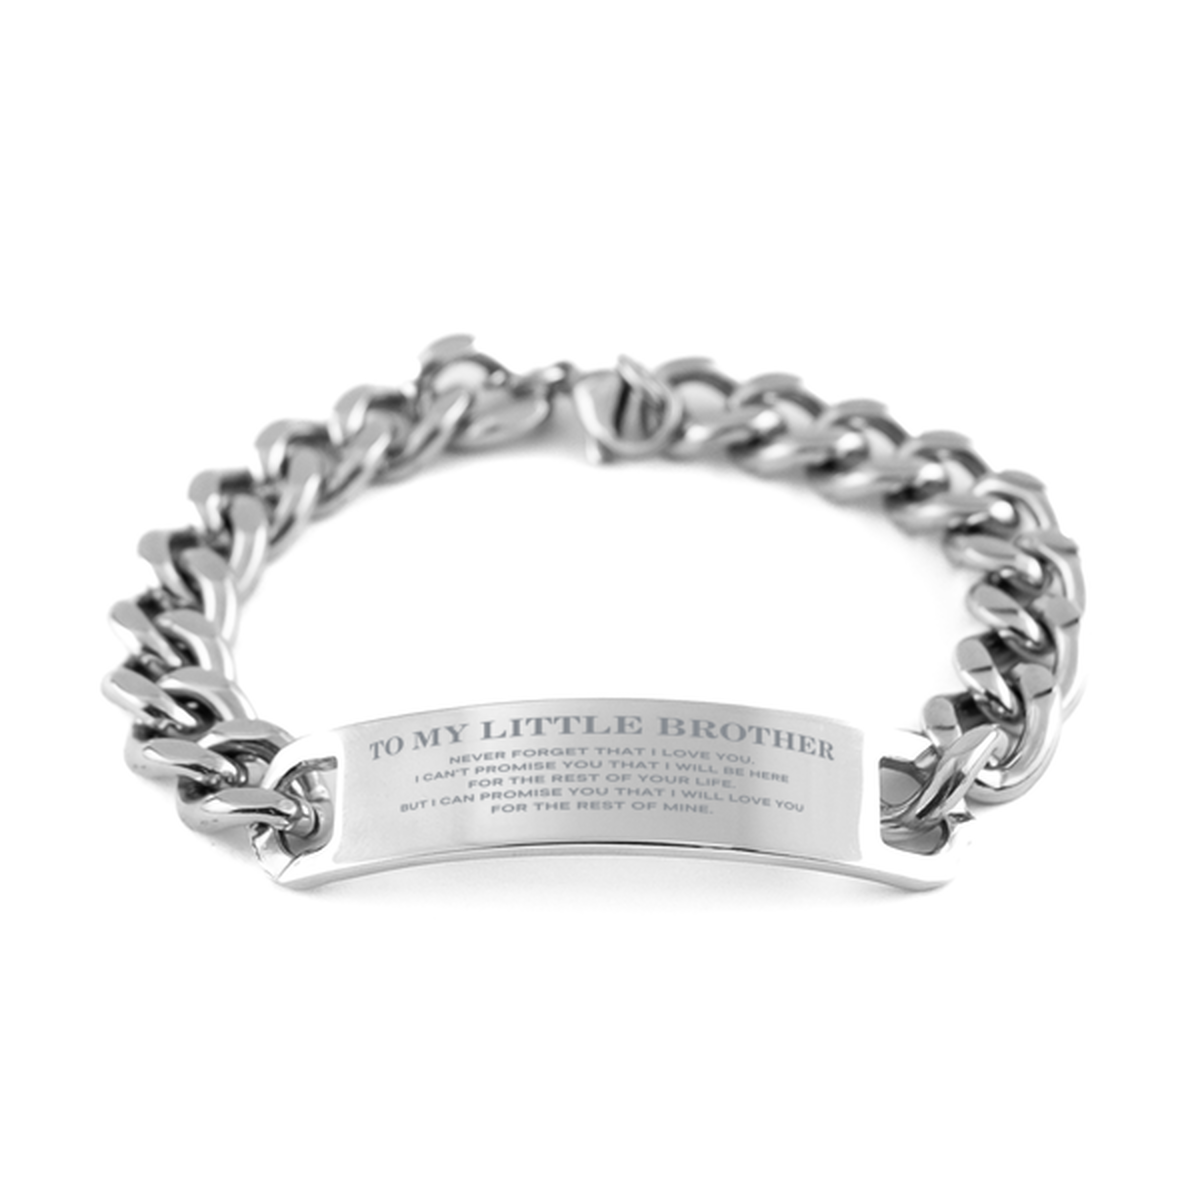 To My Little Brother Gifts, I will love you for the rest of mine, Love Little Brother Bracelet, Birthday Christmas Unique Cuban Chain Stainless Steel Bracelet For Little Brother